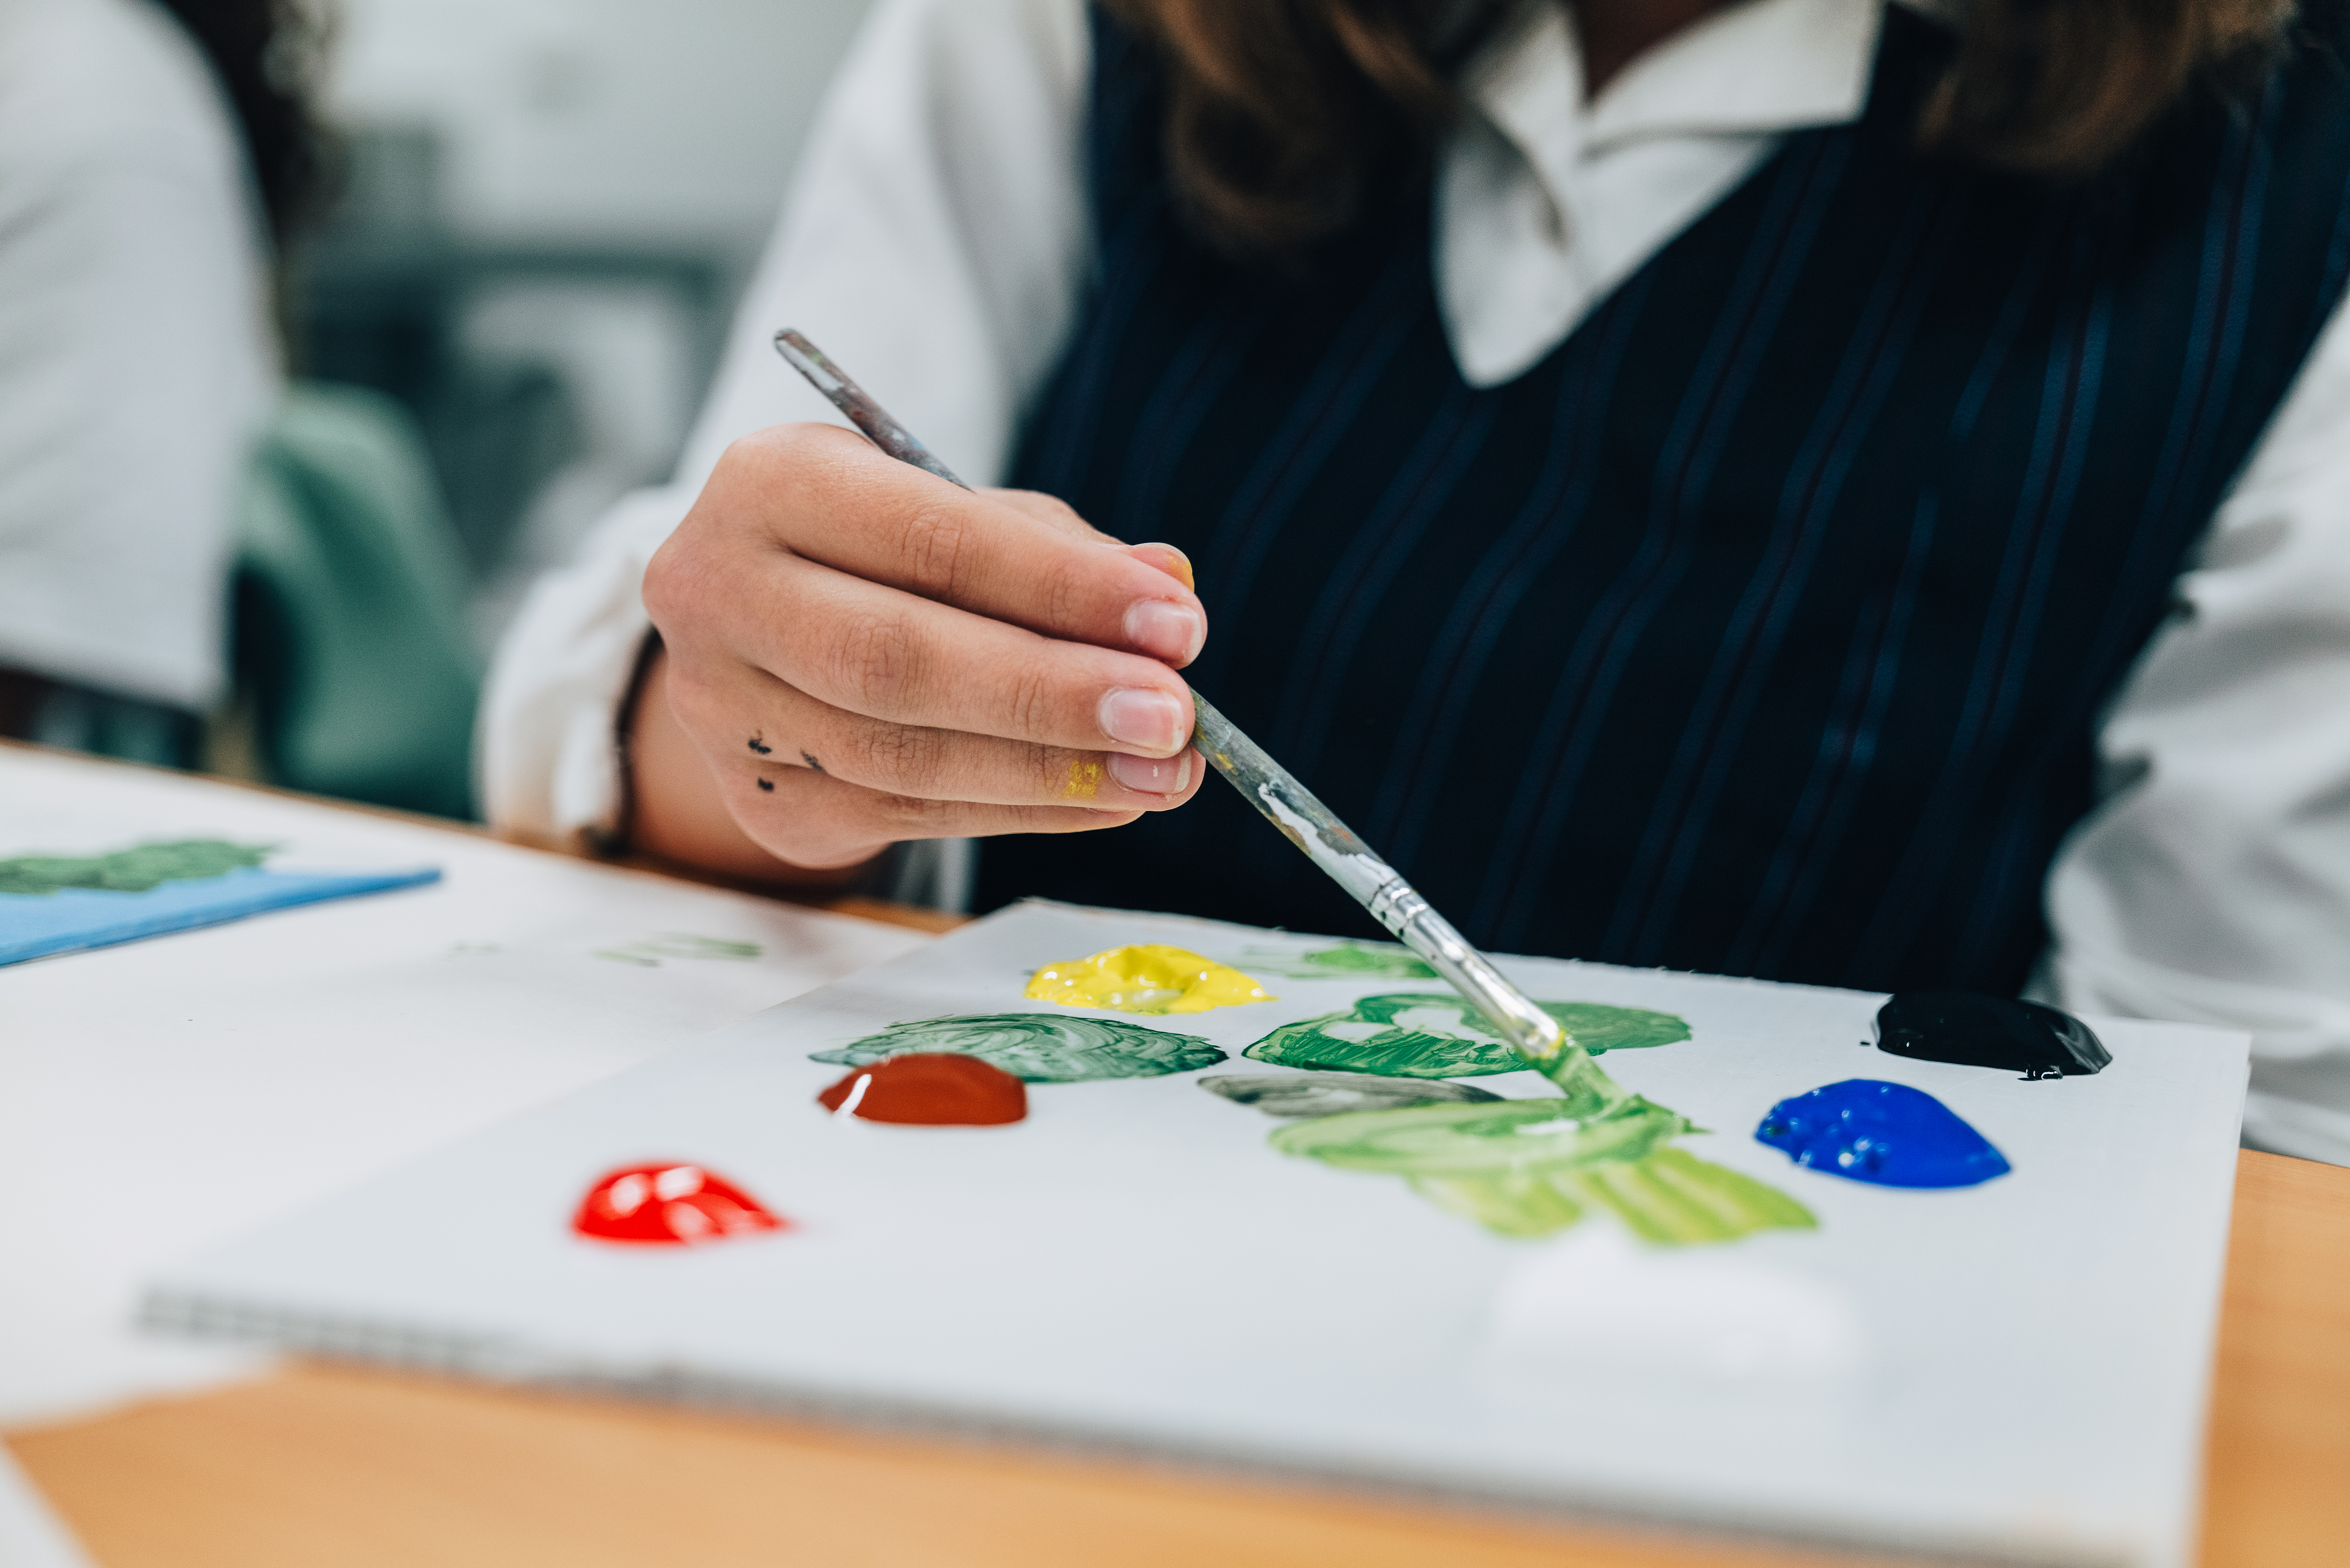 Female student wearing green tartan pinafore and white long sleeve shirt holing paintbrush over palette with large globs of red, yellow and blue paint. She is making the colour green.